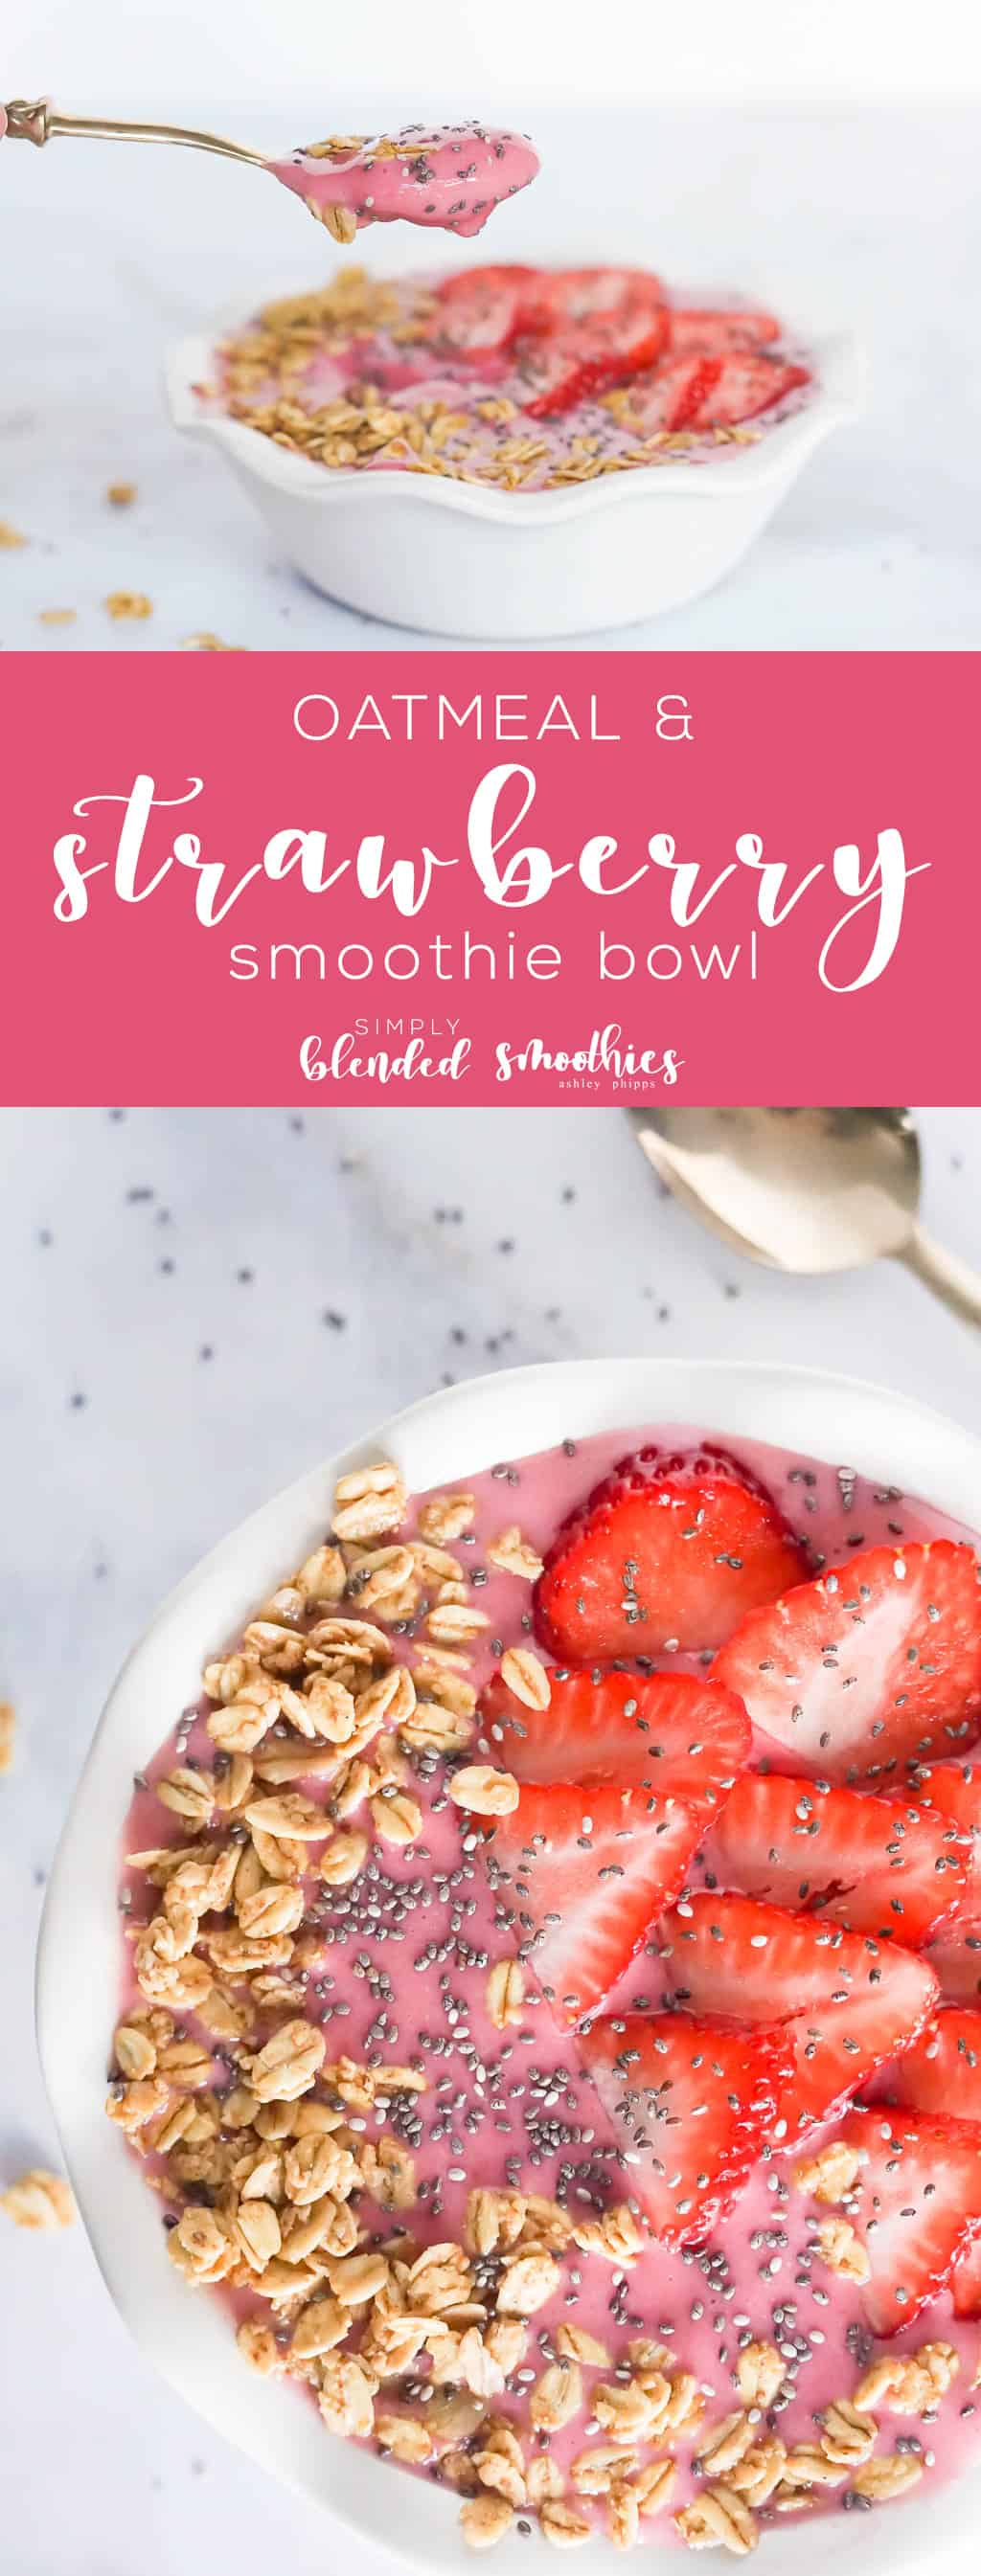 Strawberry Oatmeal Smoothie Bowl   Simply Blended Smoothies